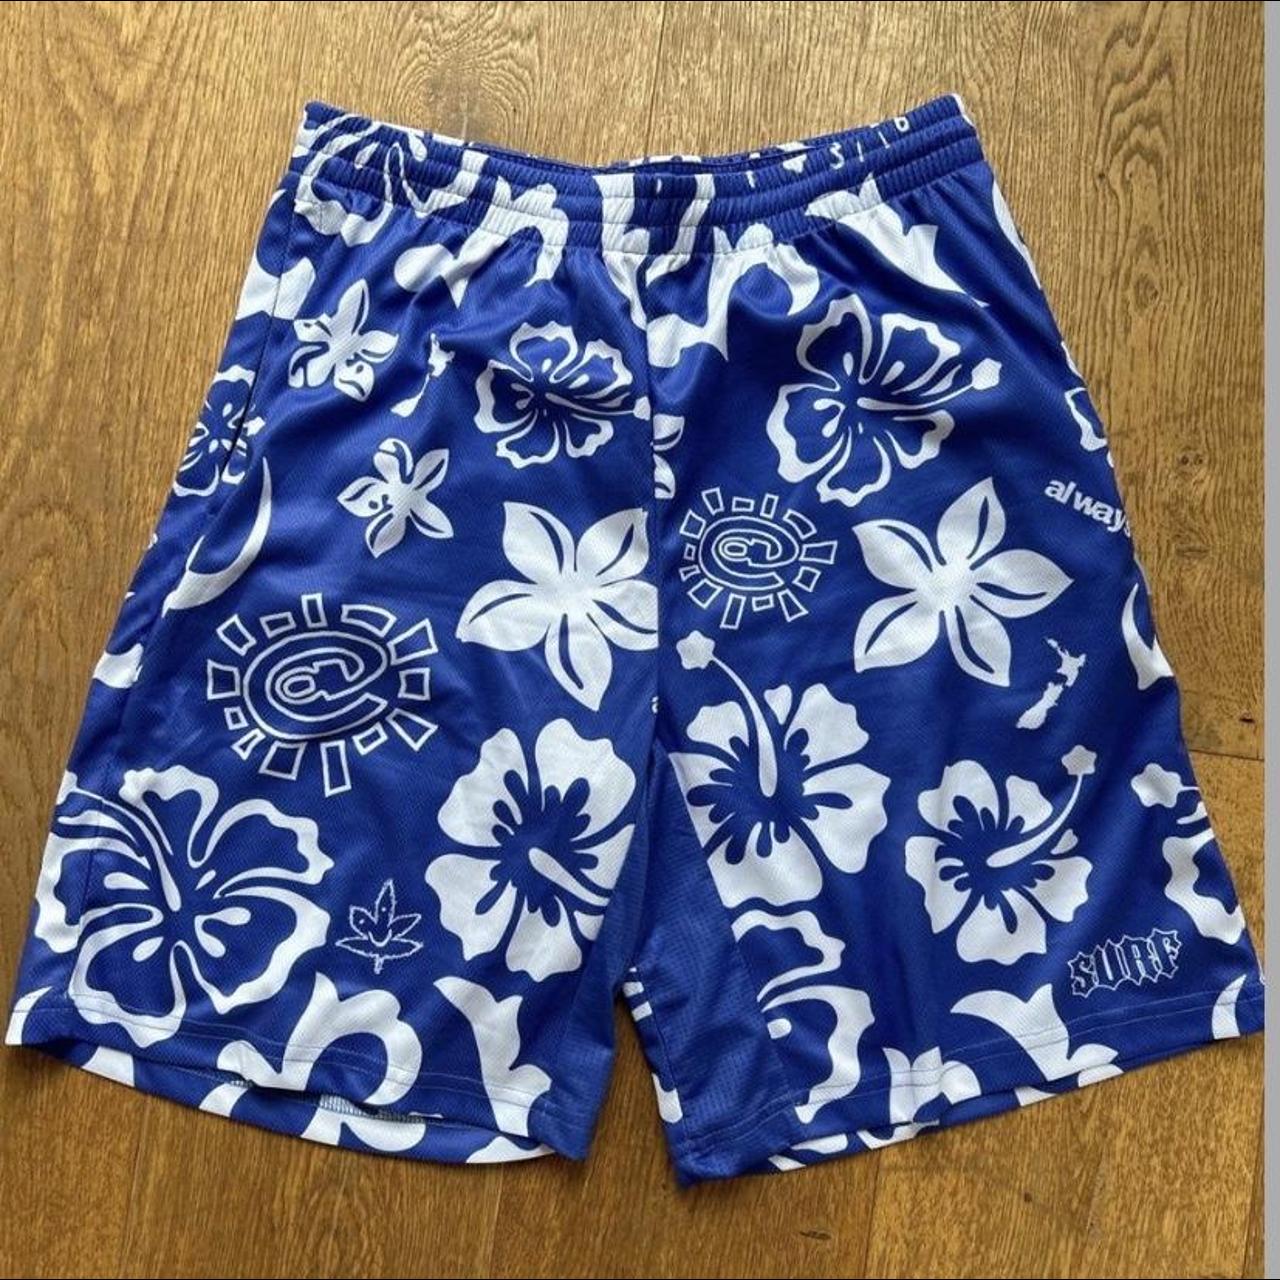 Always Do What You Should Do Men's Blue and White Shorts | Depop